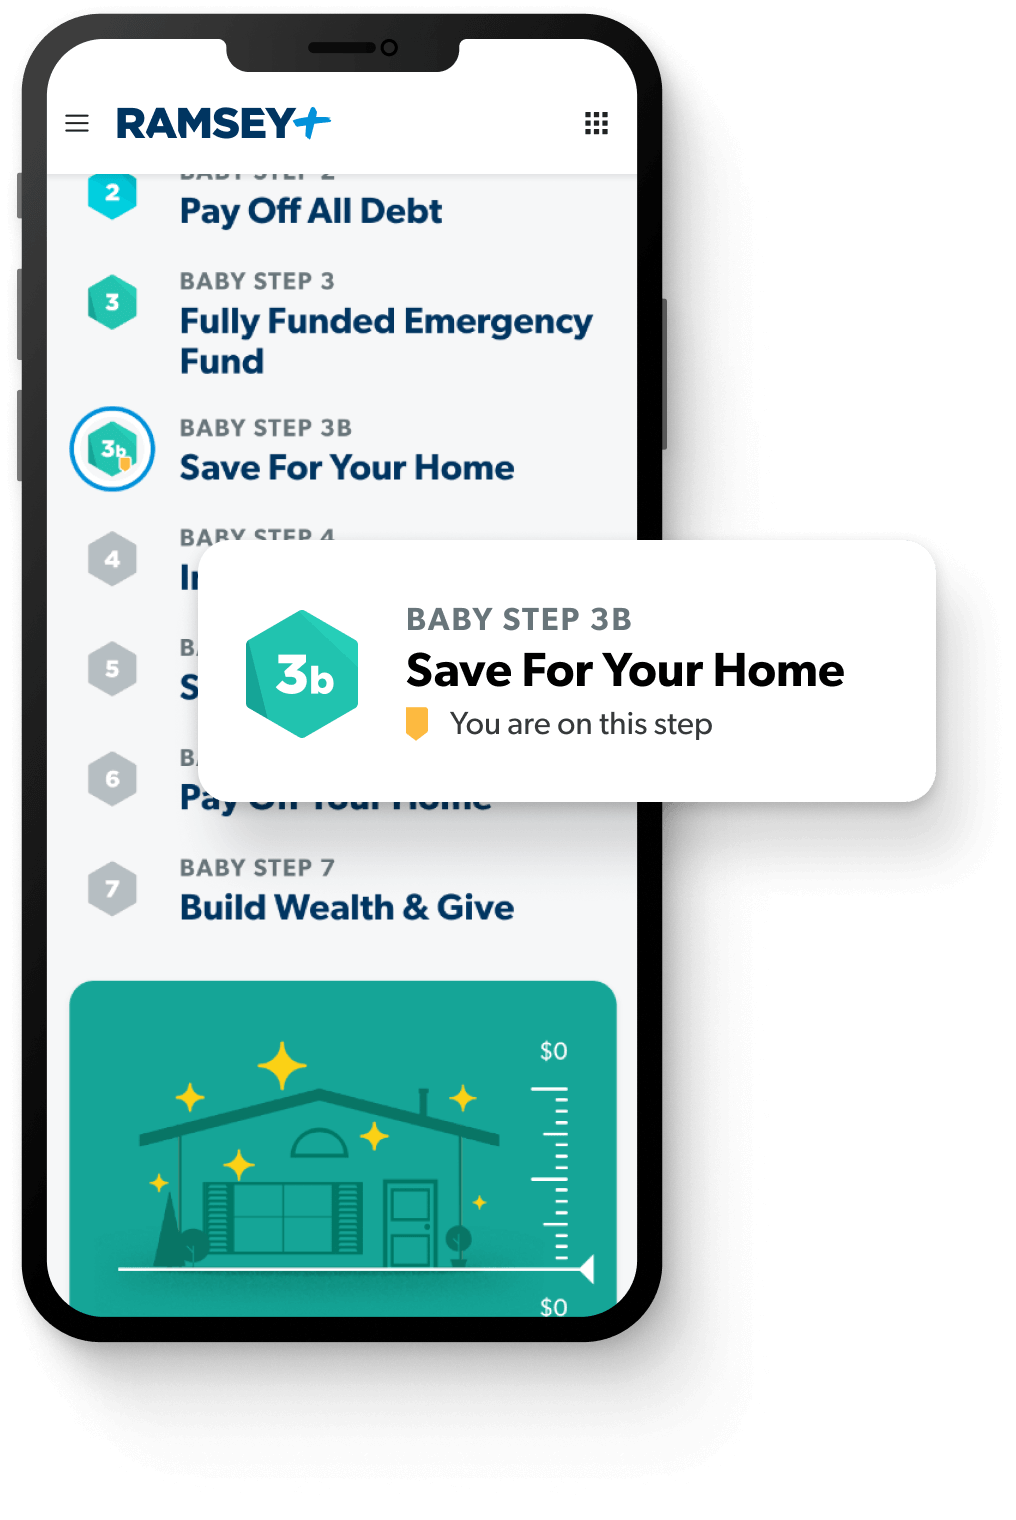 A screenshot of the 7 Baby Steps with "Save For Your Home" as the featured step.